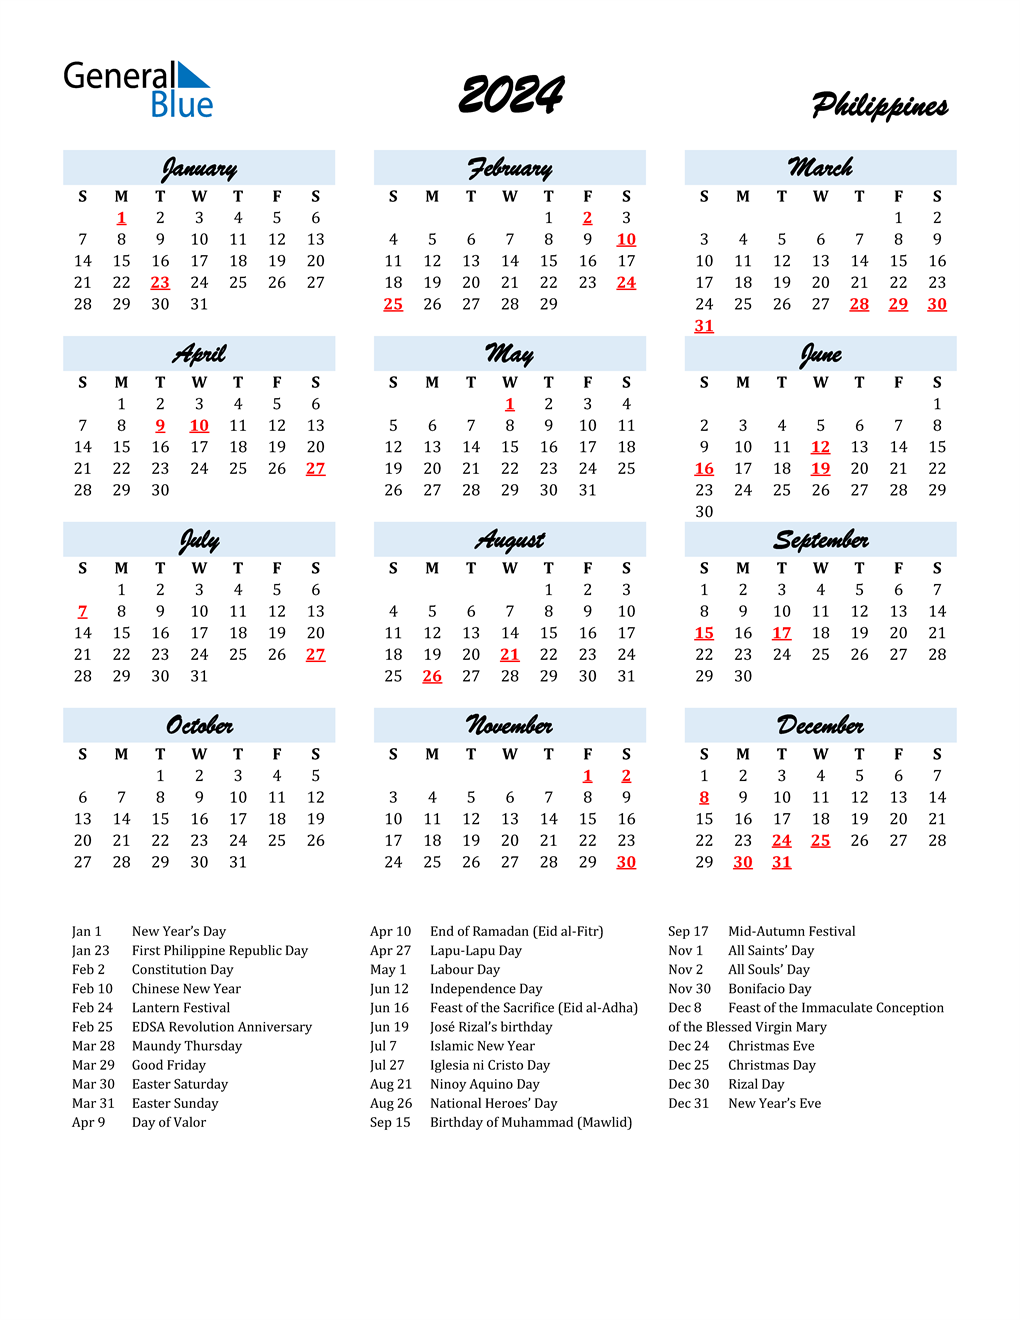 Calendar 2024 Printable Philippines With Holidays 2024 CALENDAR PRINTABLE - Free Printable 2024 Monthly Calendar With Holidays Philippines